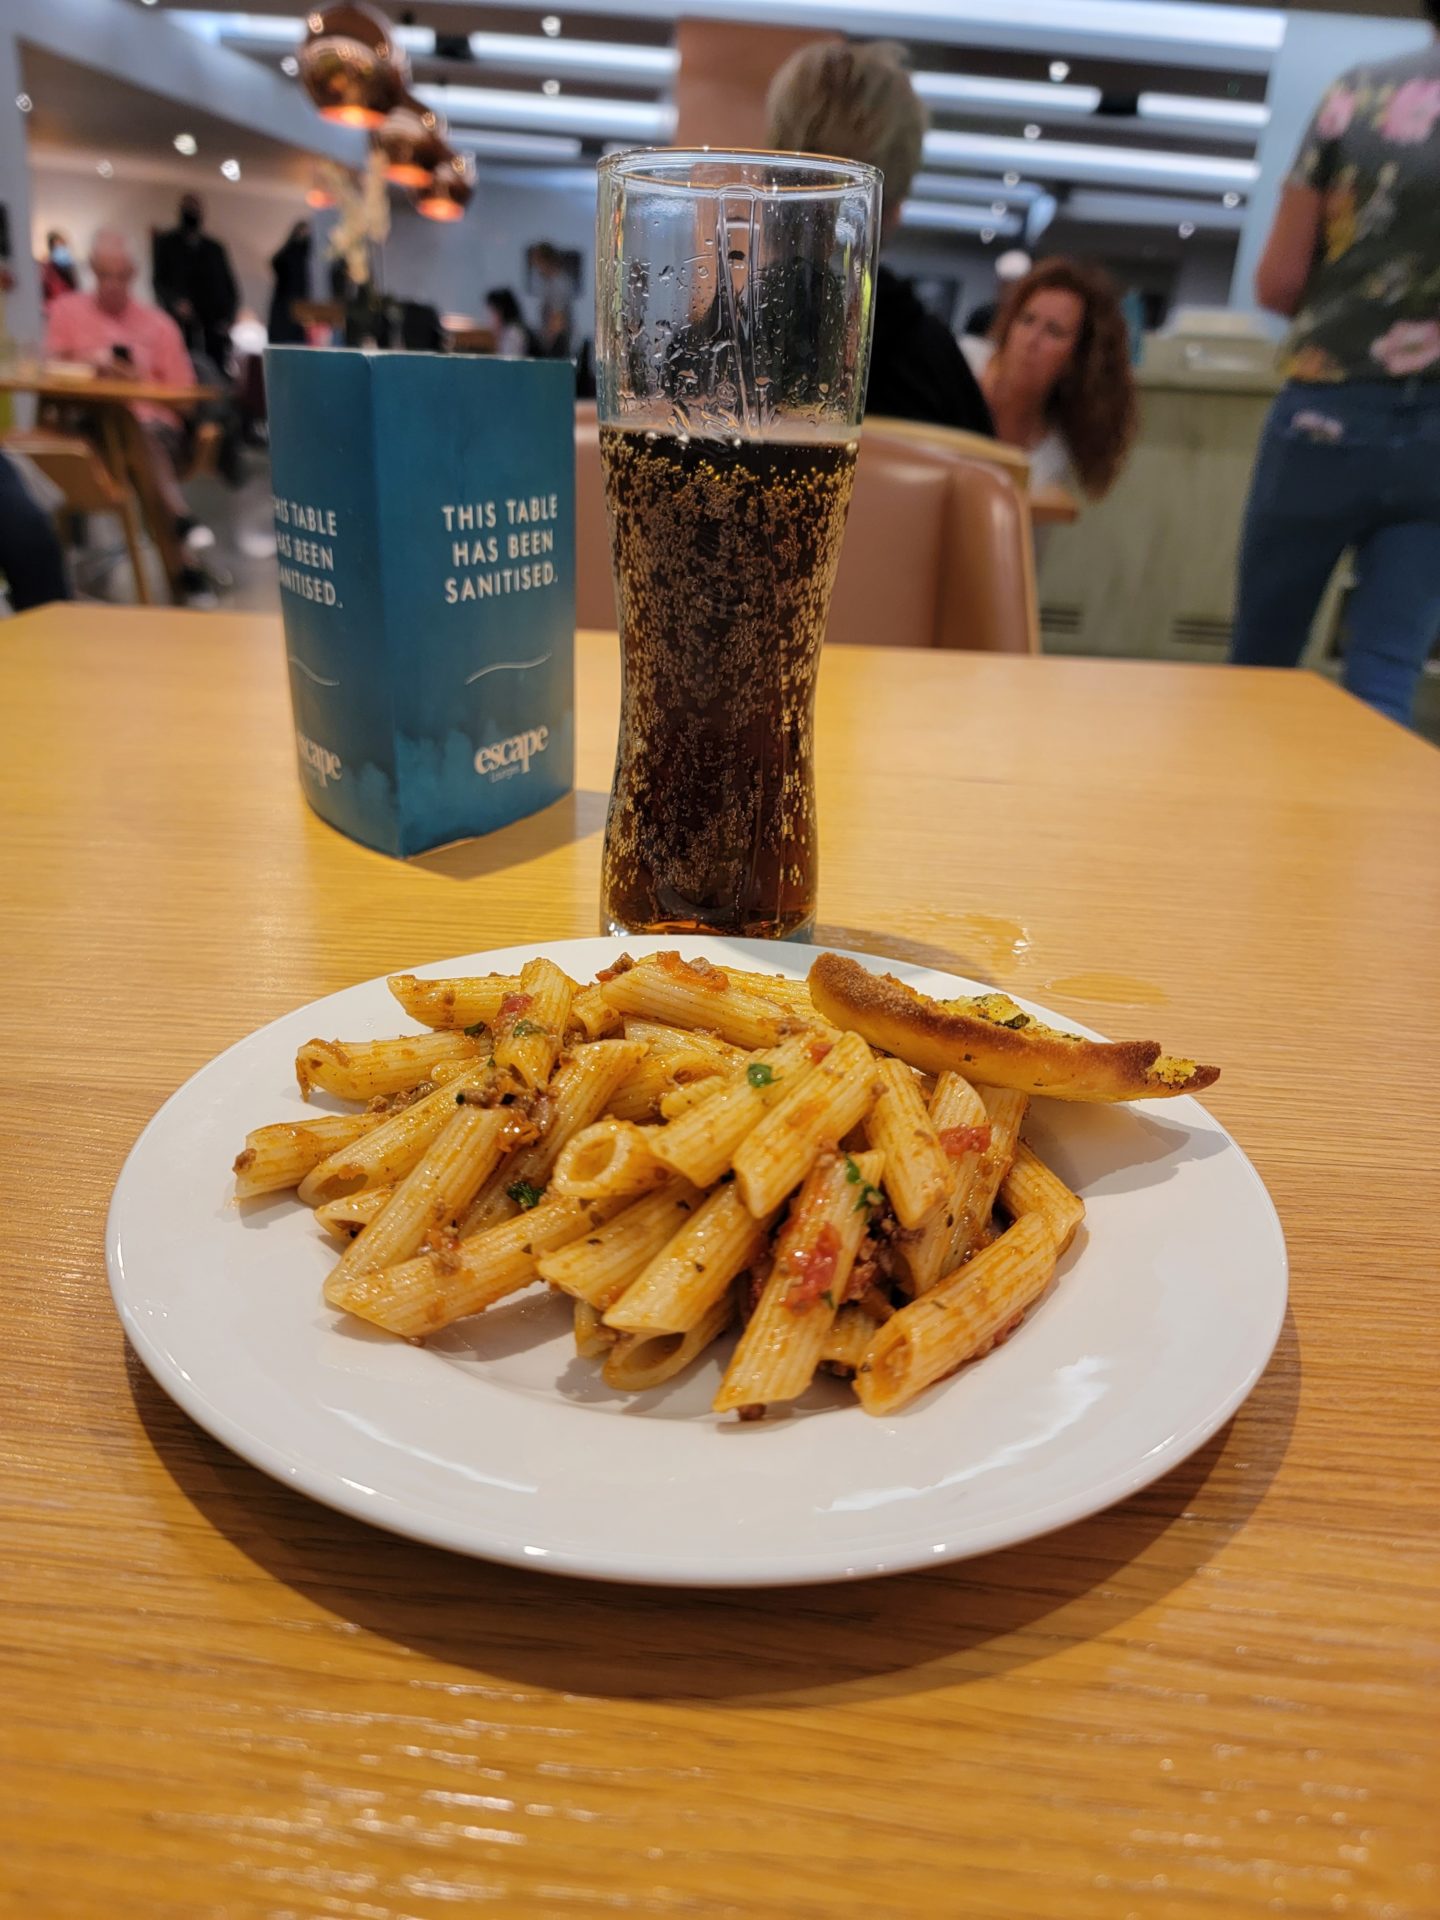 a plate of pasta and a glass of beer on a table